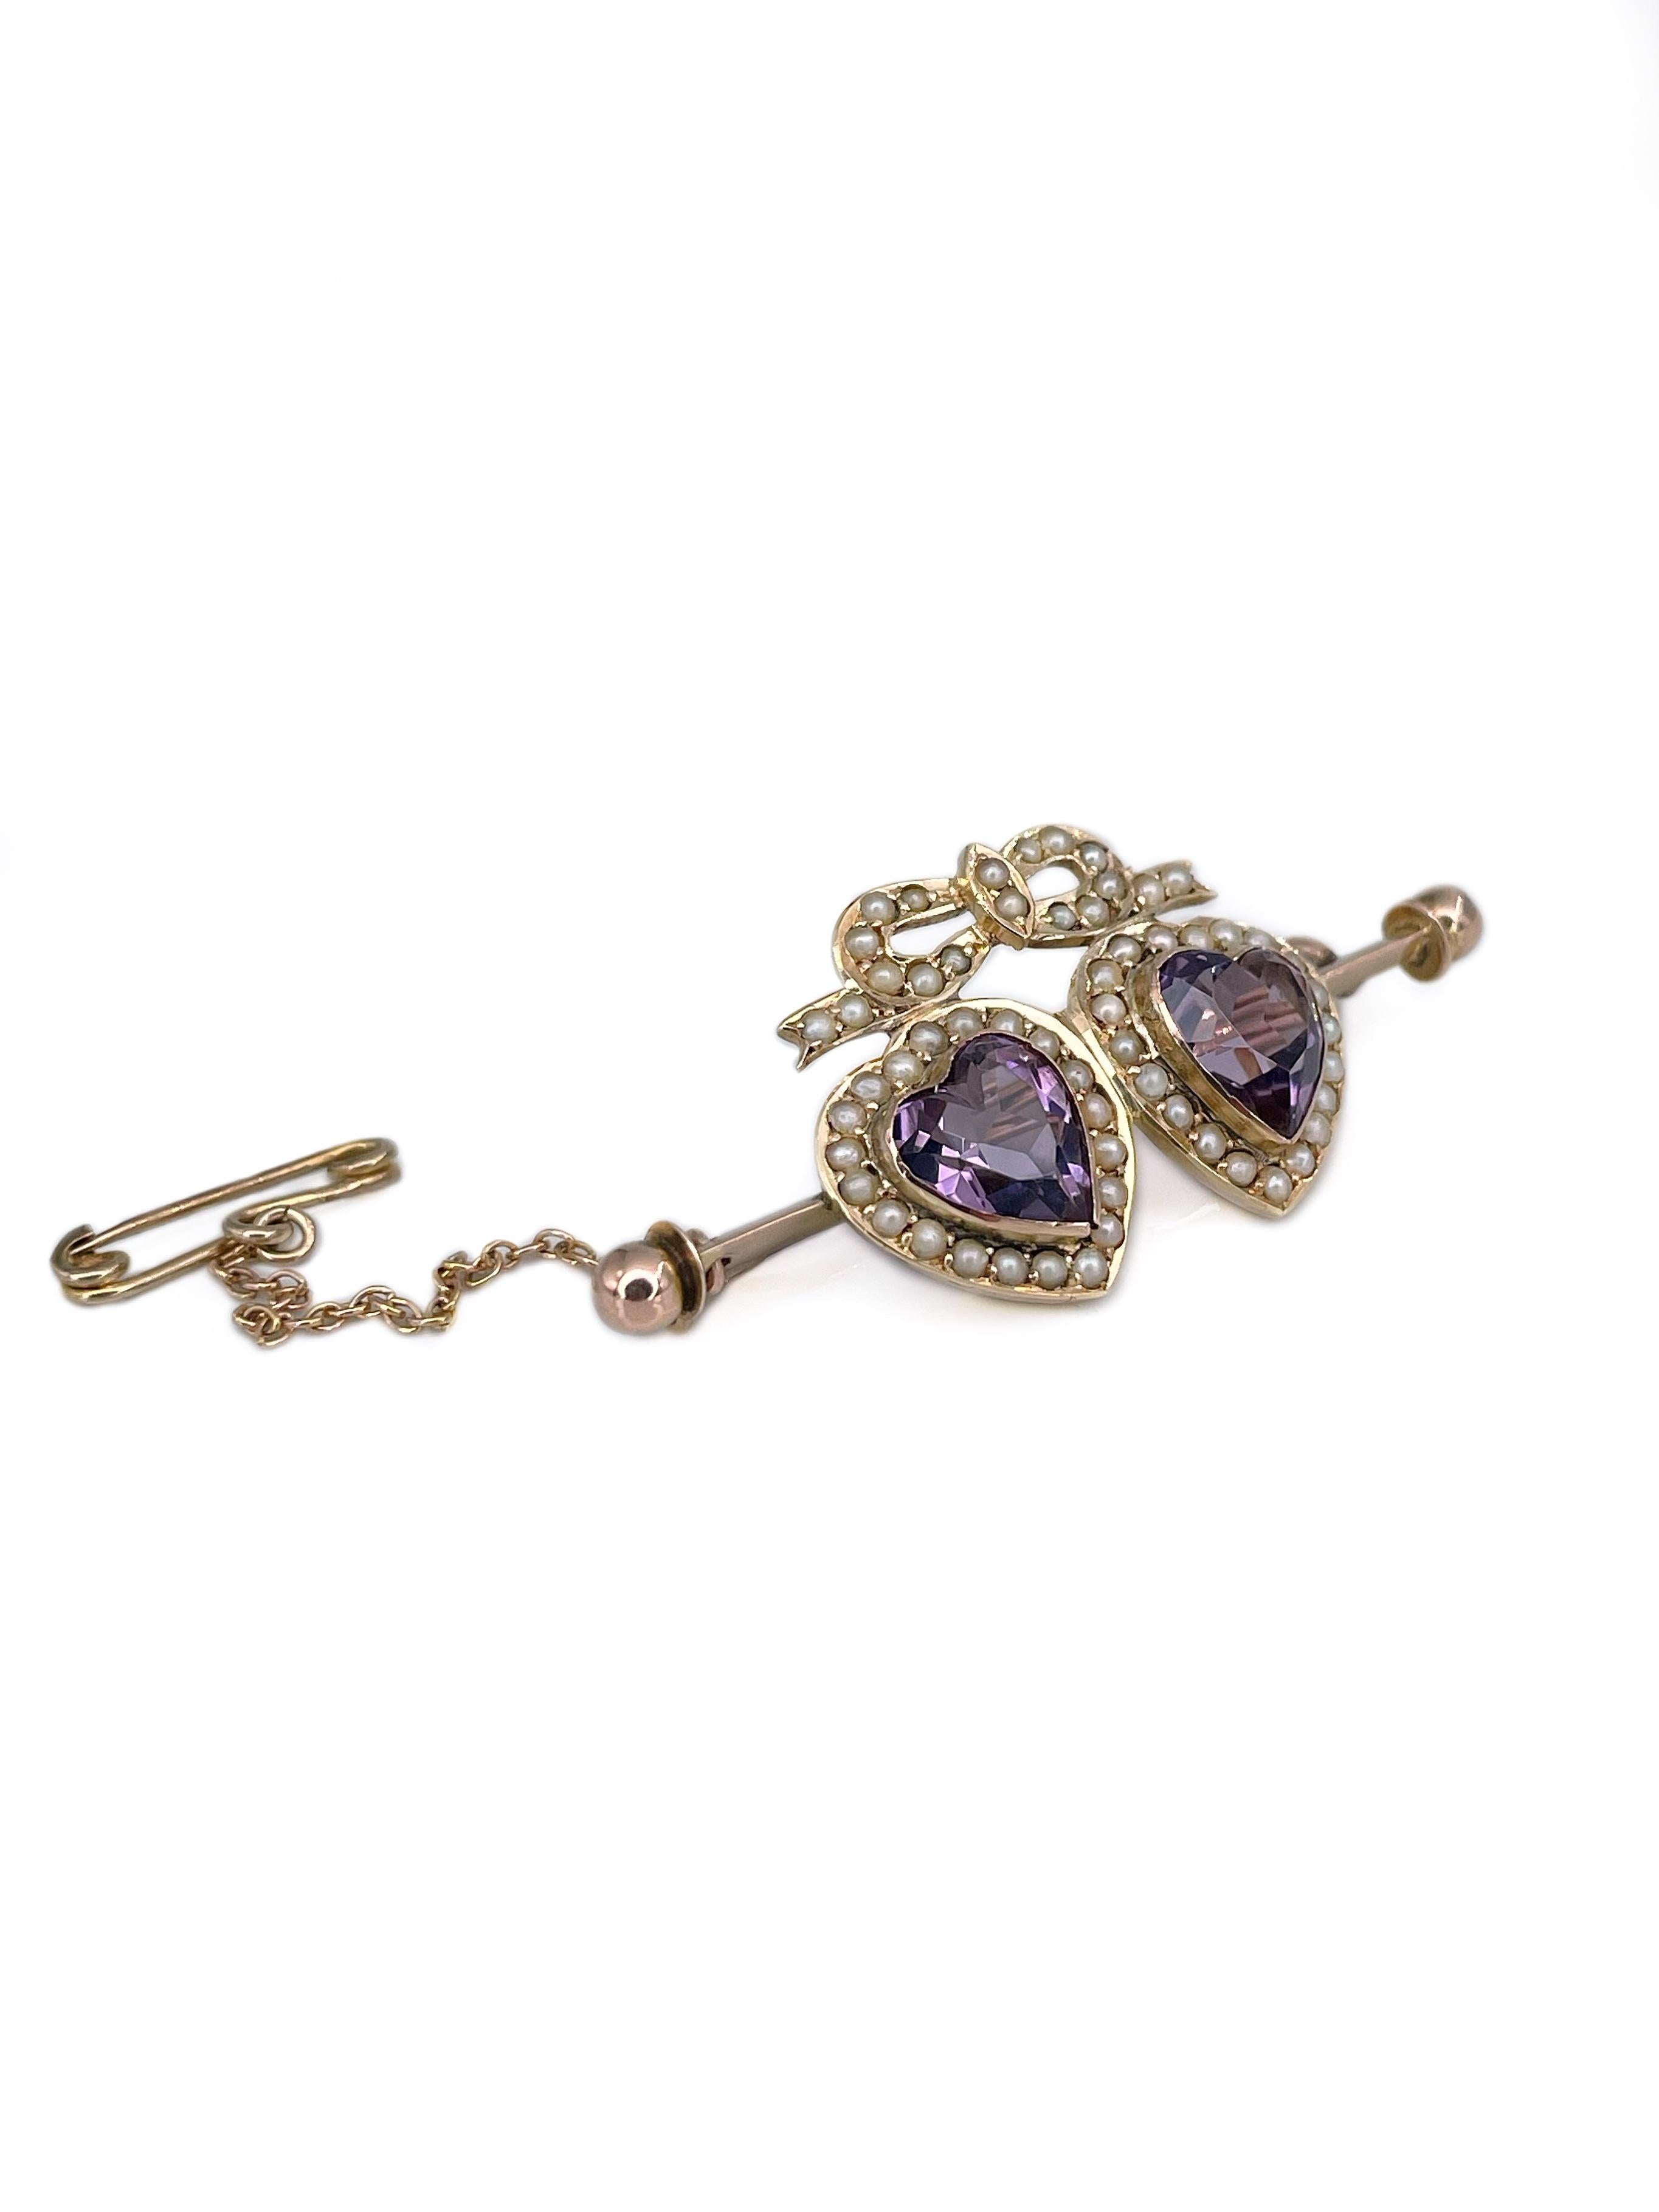 Mixed Cut Victorian 9 Karat Gold Amethyst Seed Pearl Double Heart Bar Brooch For Sale